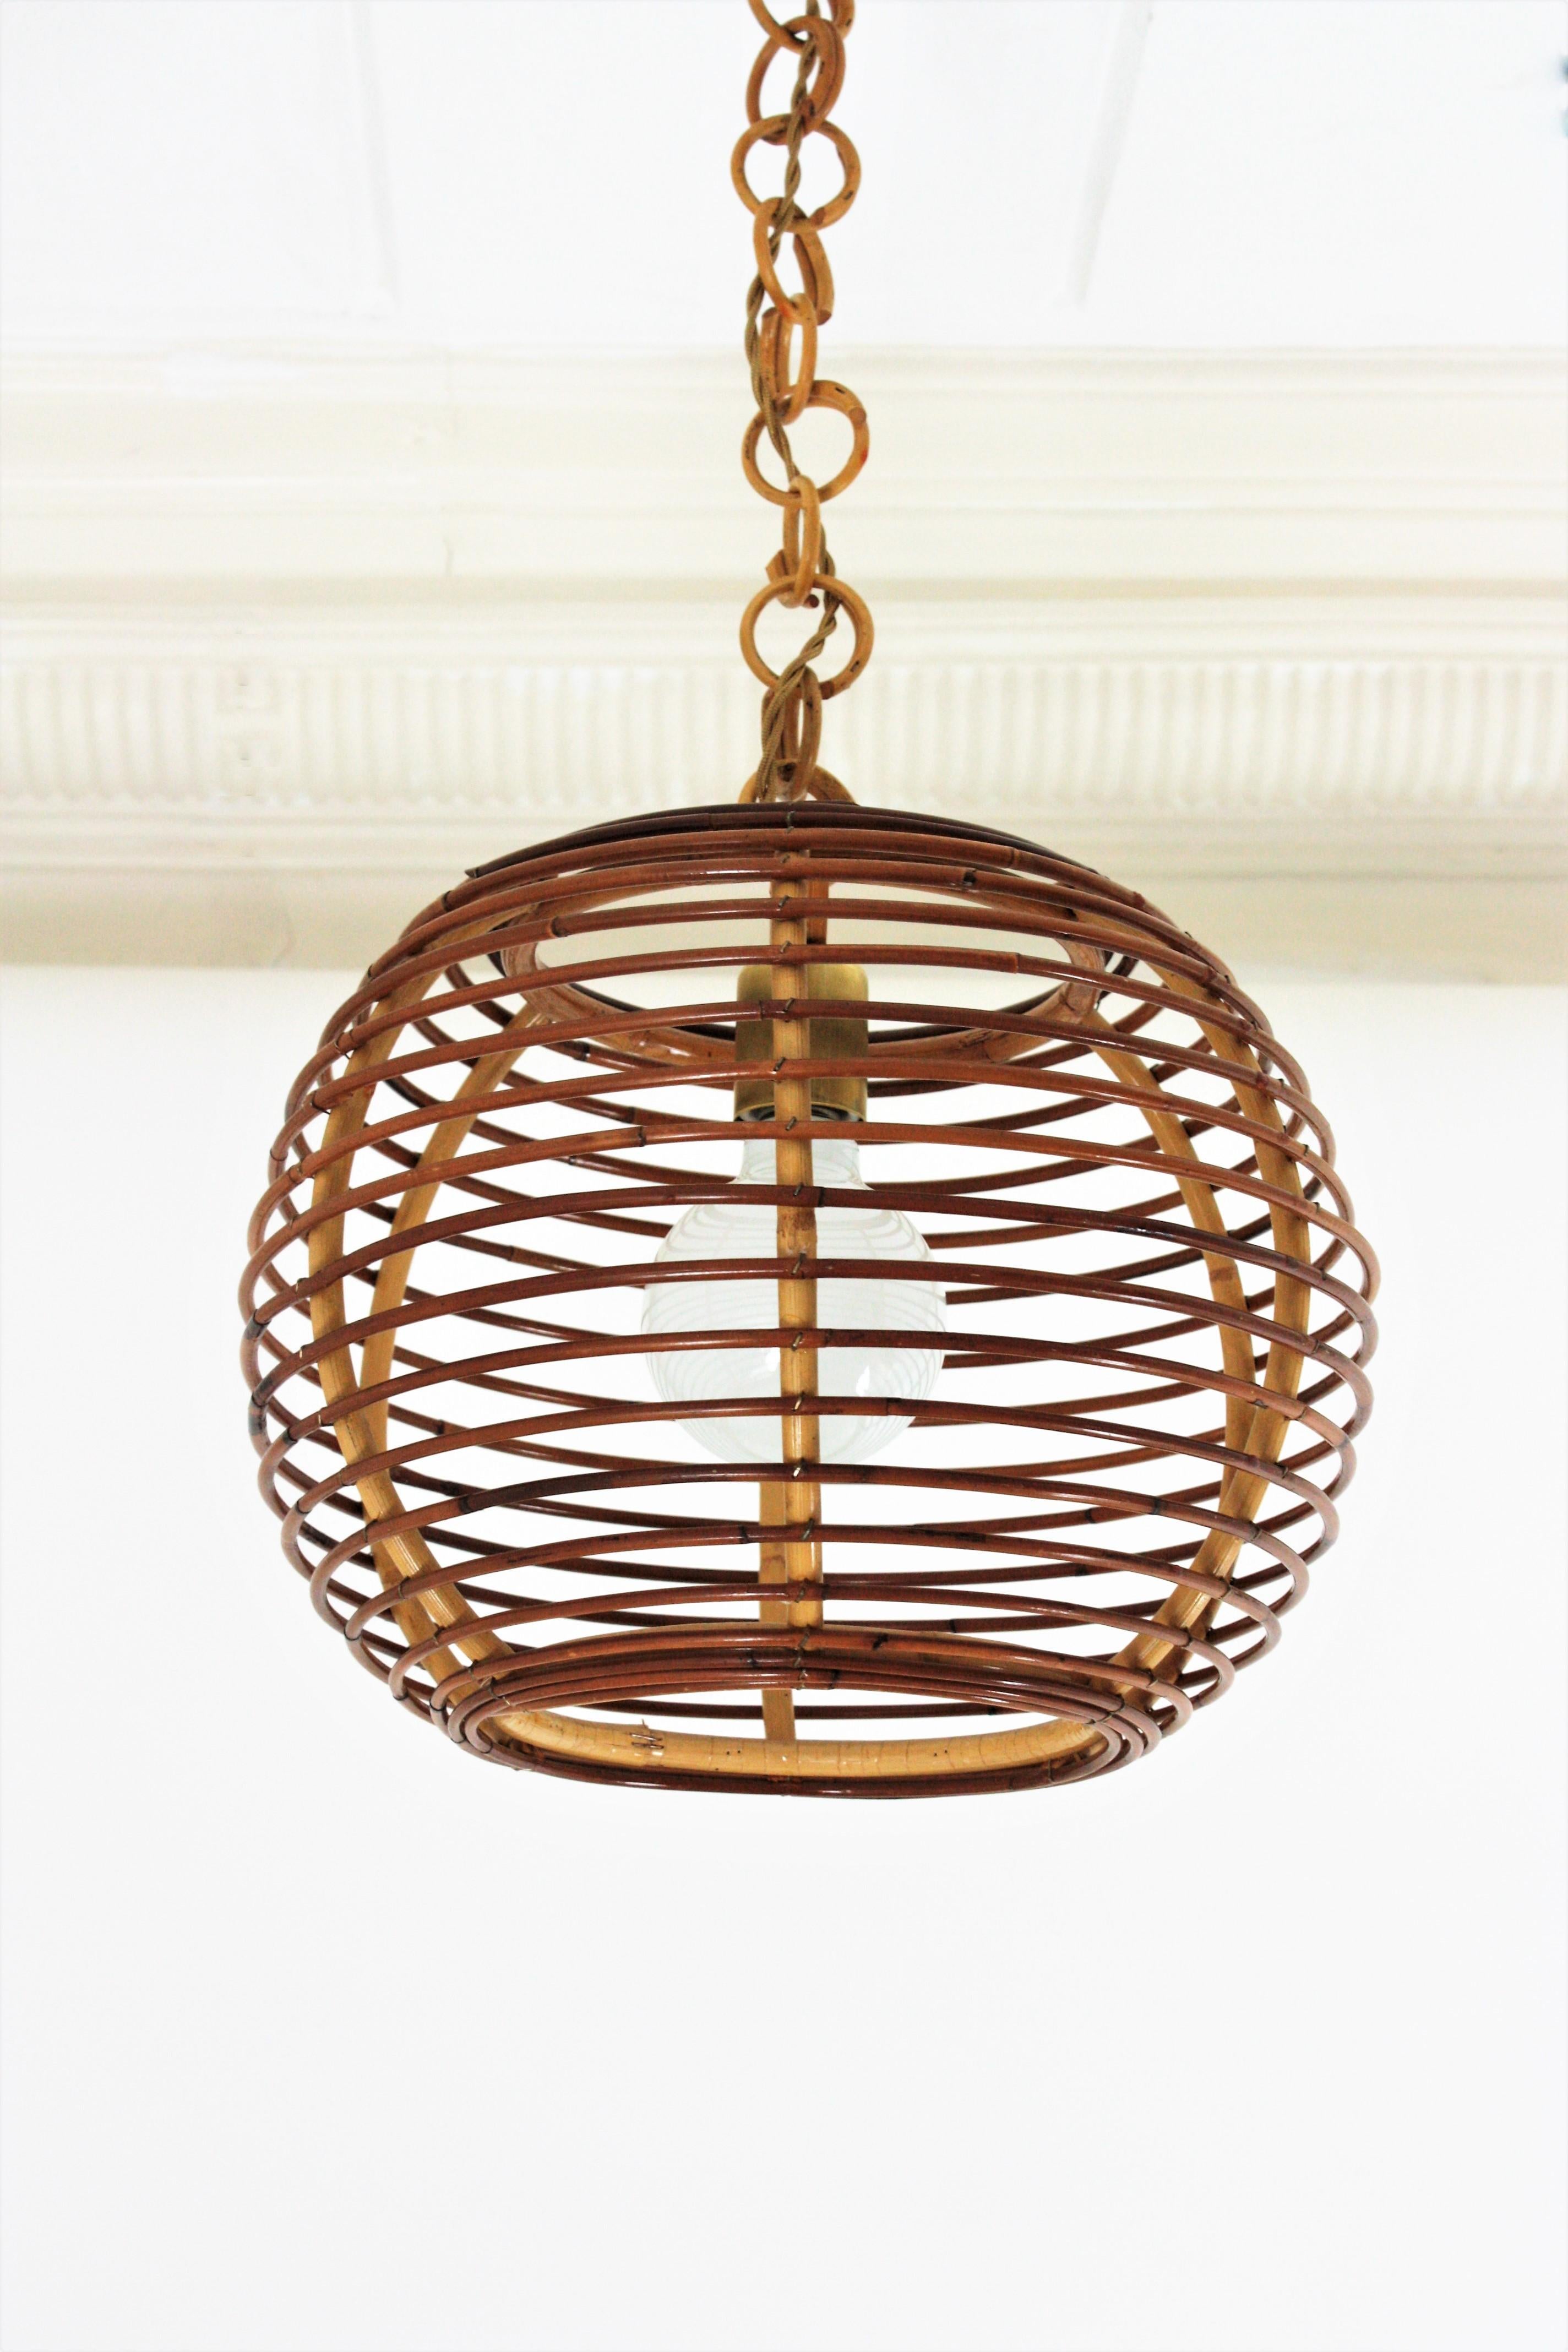 Spanish Modern rattan lantern with globe or ball shaped lampshade, Spain, 1950-1960s.
This suspension lamp is entirely handcrafted with rattan. The ball shaped shade hangs from a chain with round rattan links topped by a rattan canopy. The chain